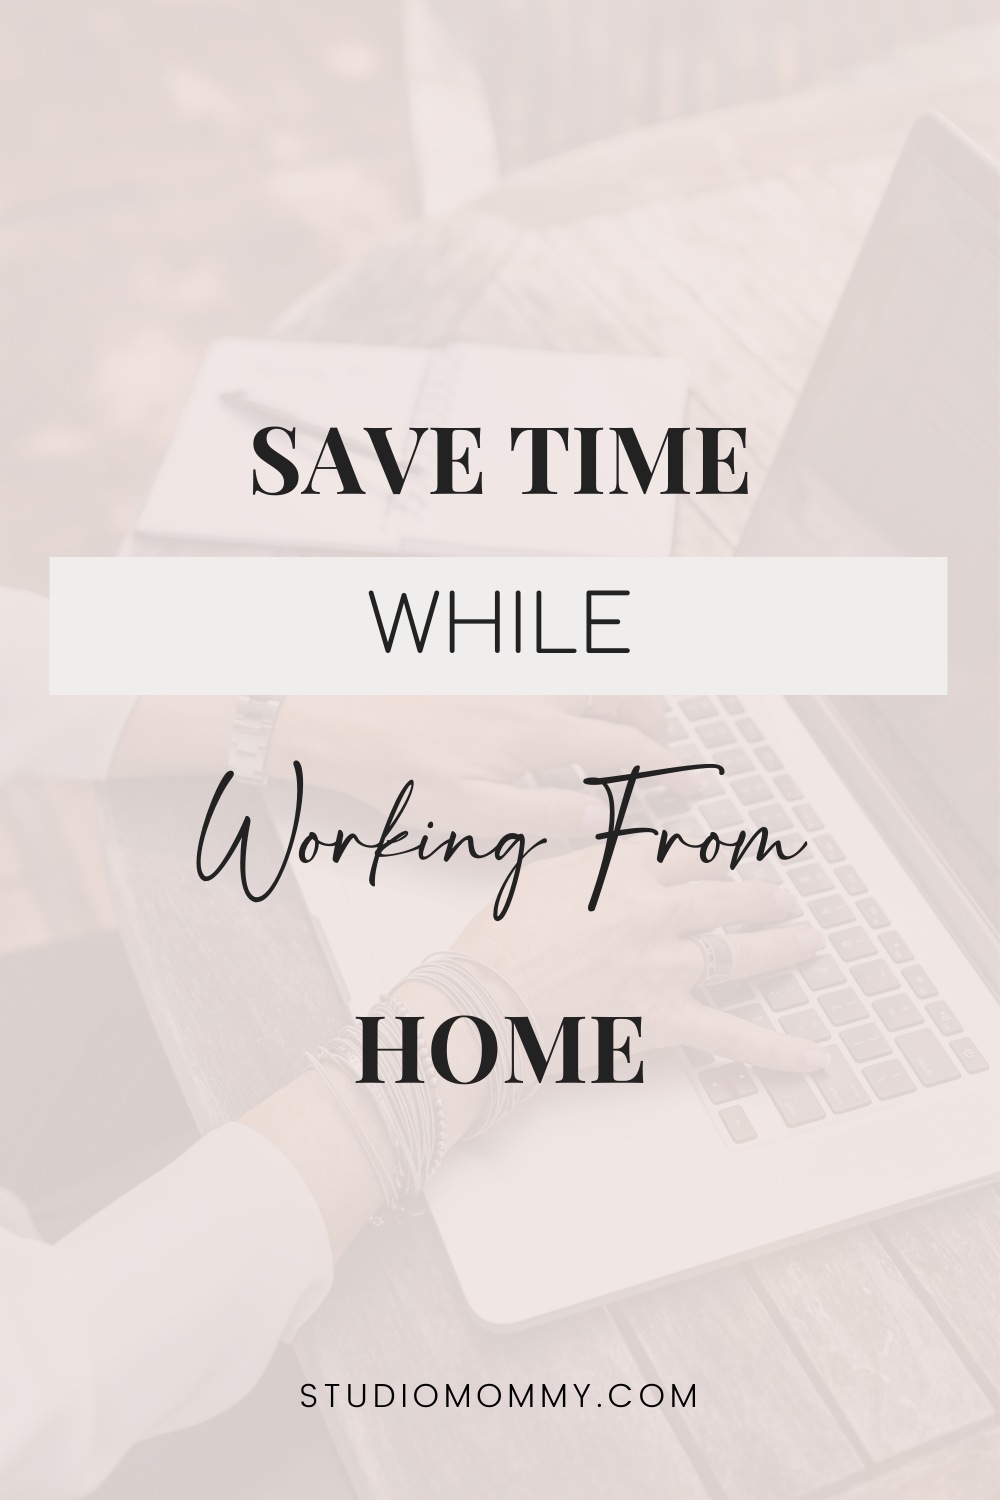 As a busy mom juggling kids and work, you find yourself rushing from your office to the after-school car pool. Struggling to balance your work and family commitments while maintaining your sanity, you long for more hours in the day. By employing several time-saving techniques, you can simplify your schedule, increase productivity and decrease stress all in a day’s work.